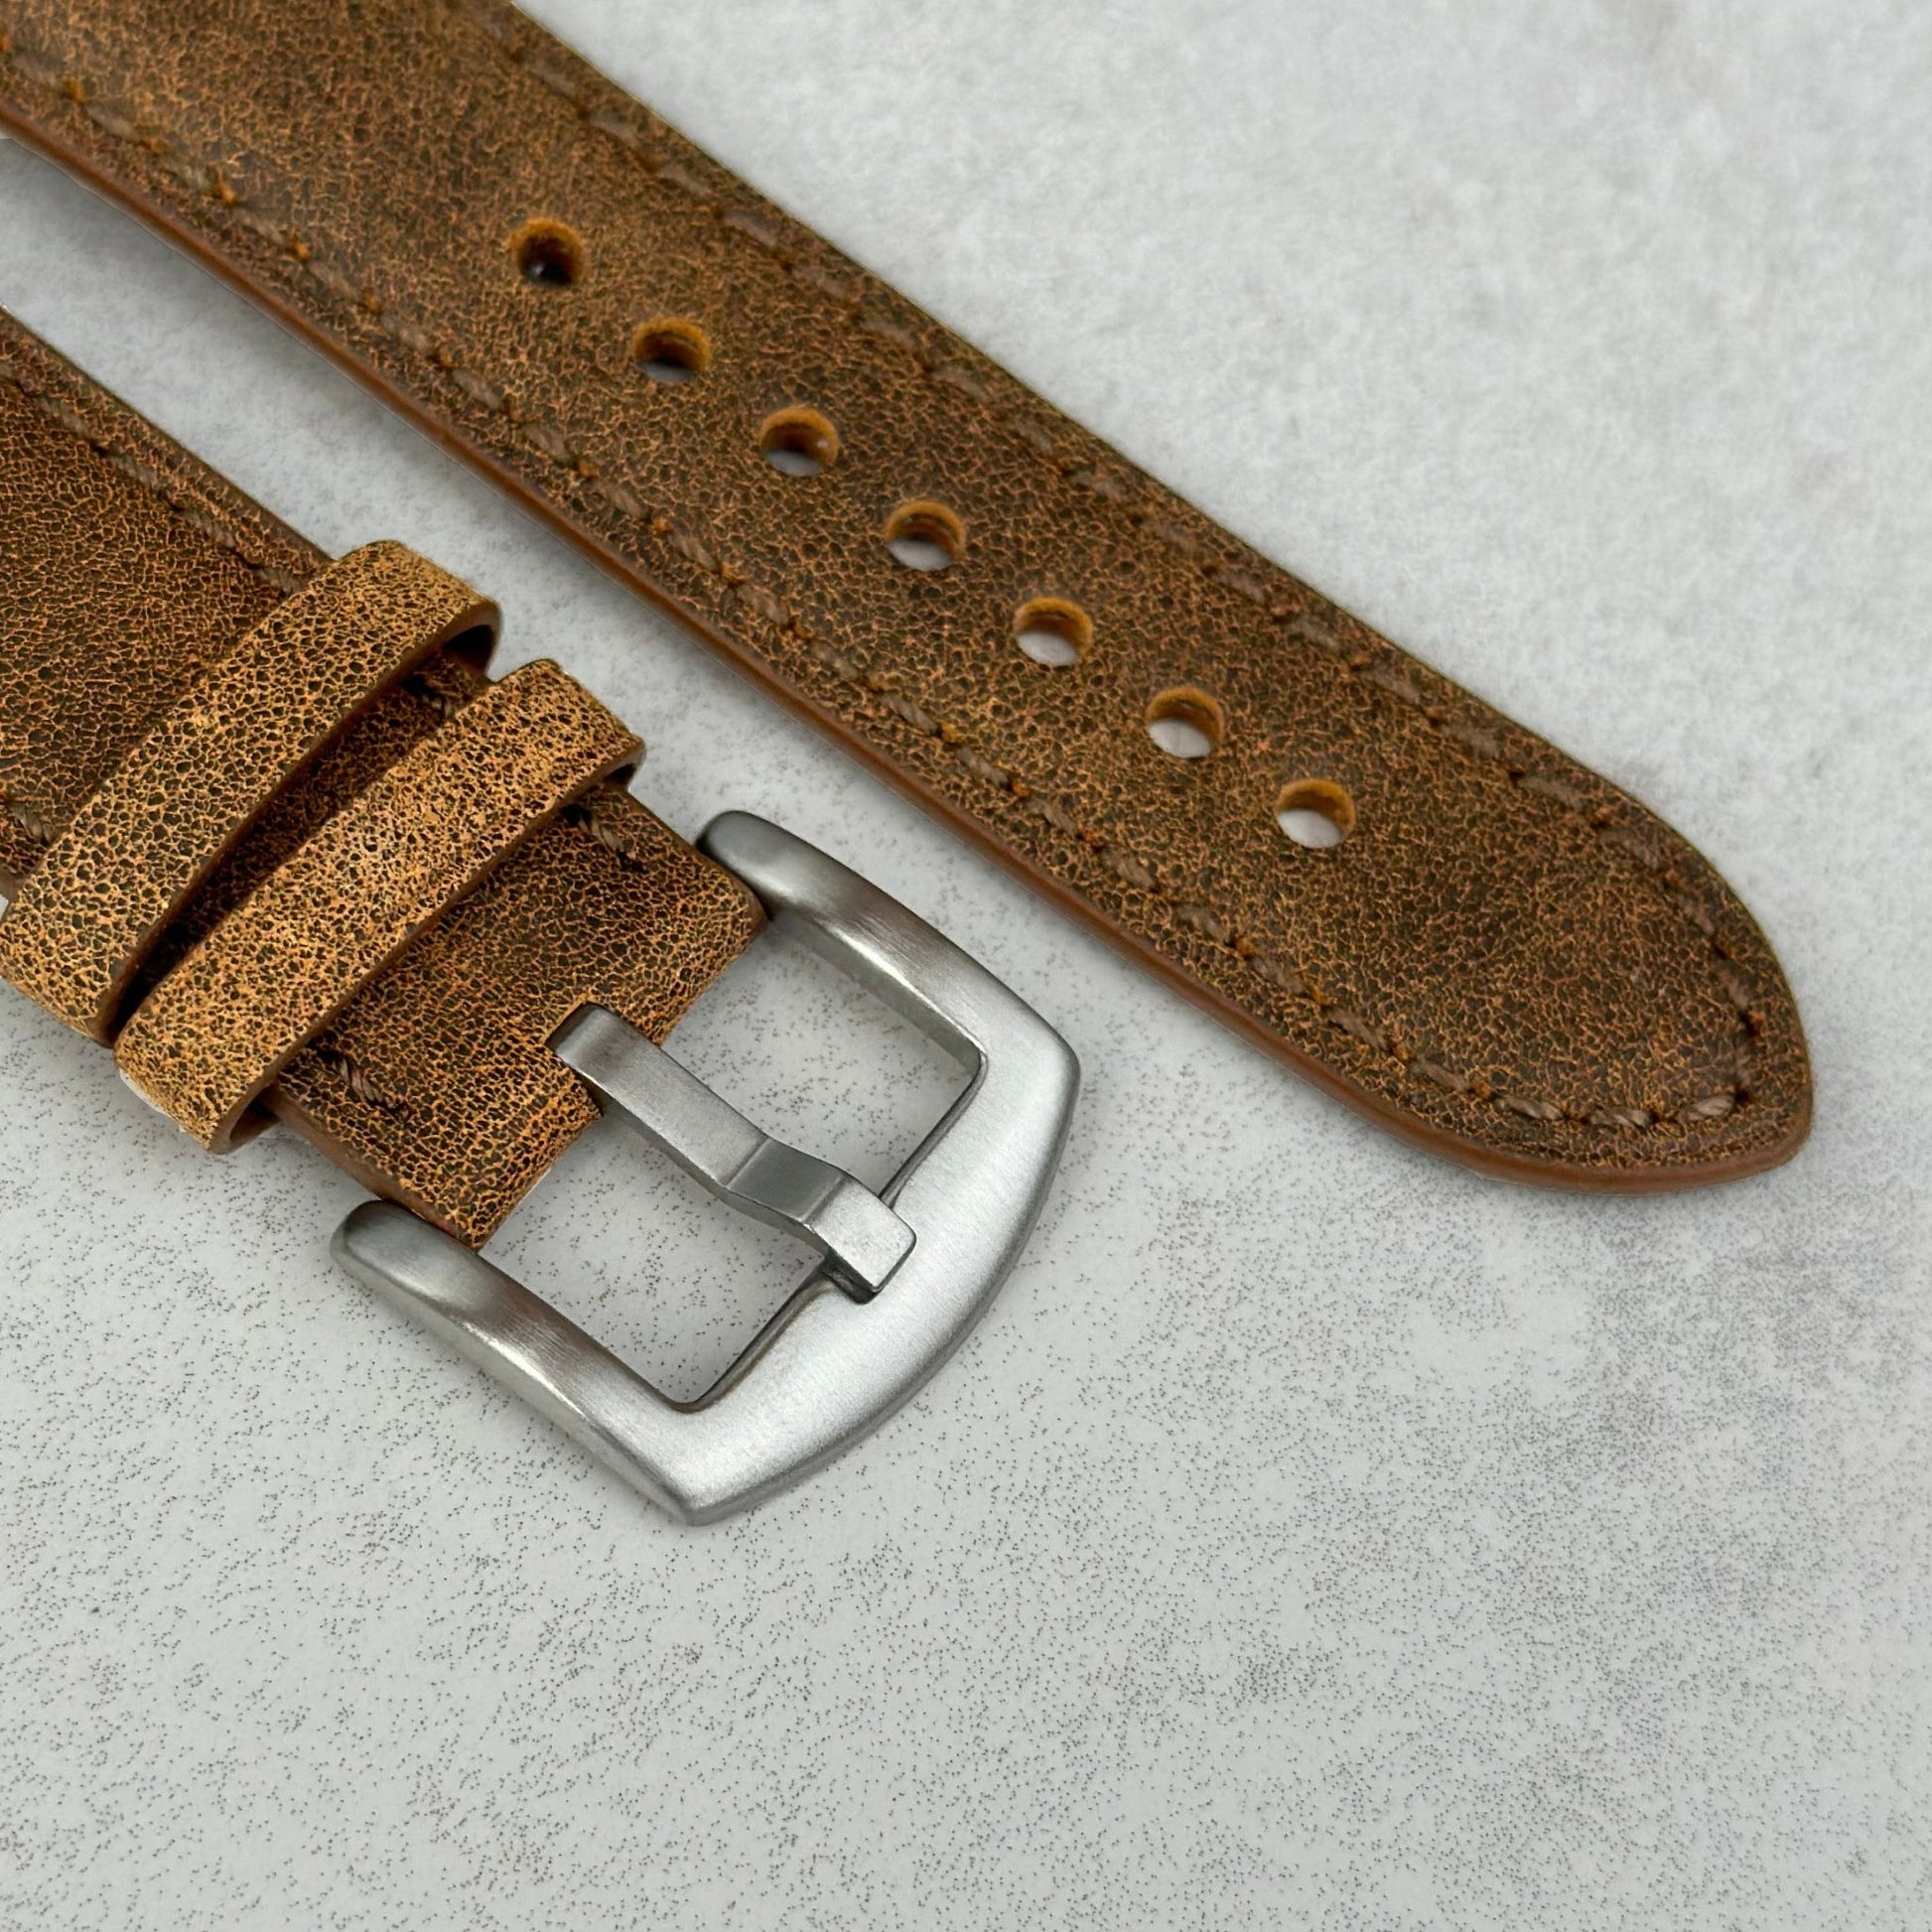 Brushed 316L stainless steel buckle on the Athens desert tan full grain leather watch strap.